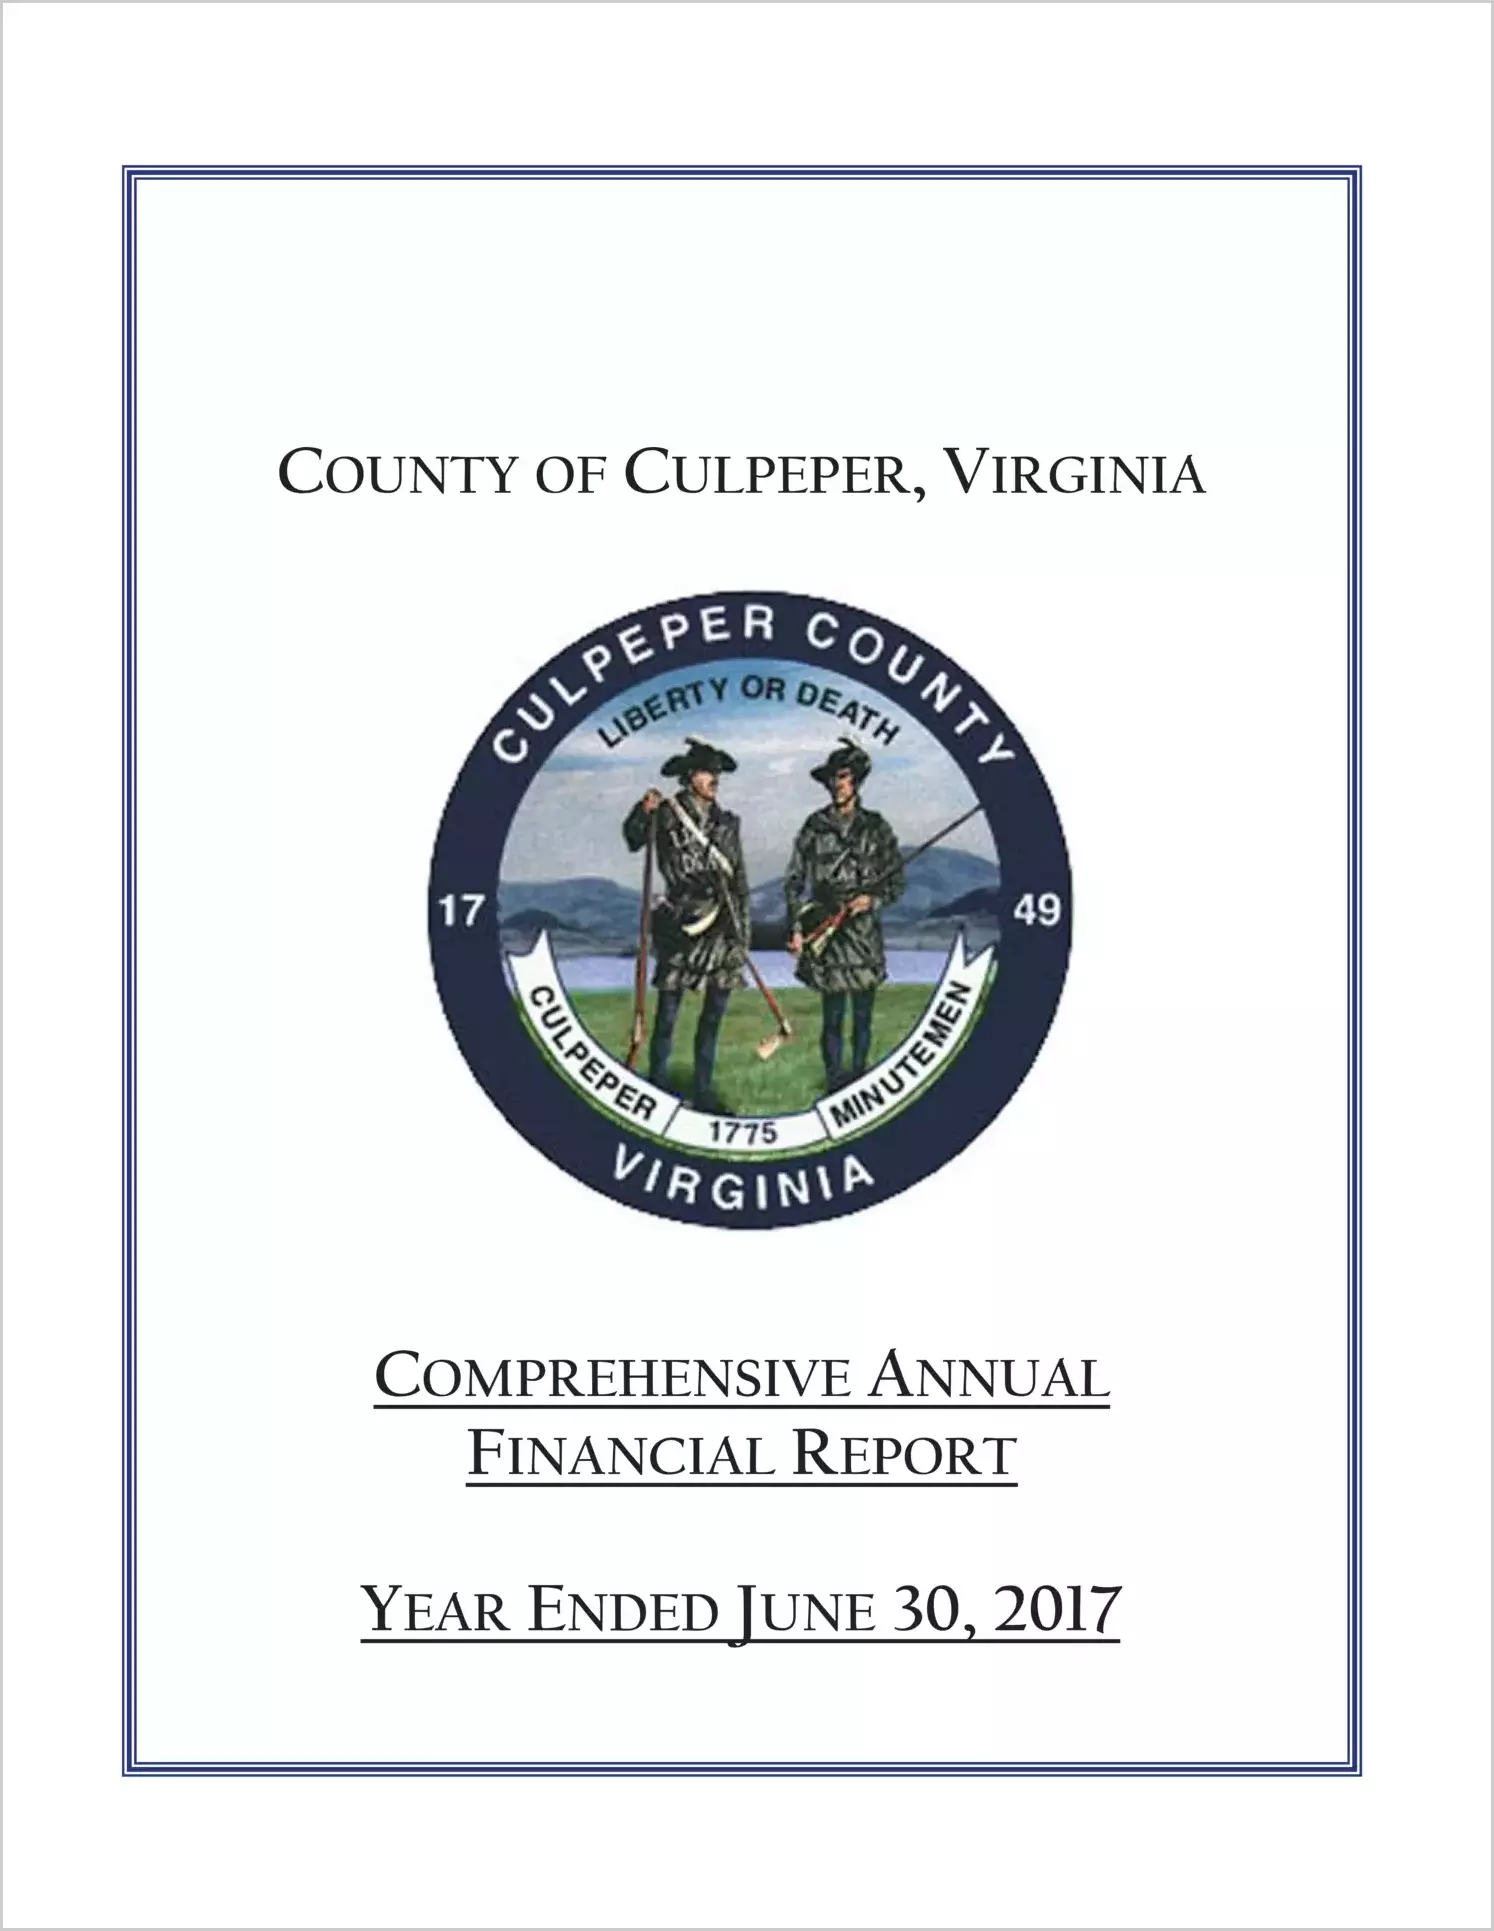 2017 Annual Financial Report for County of Culpeper